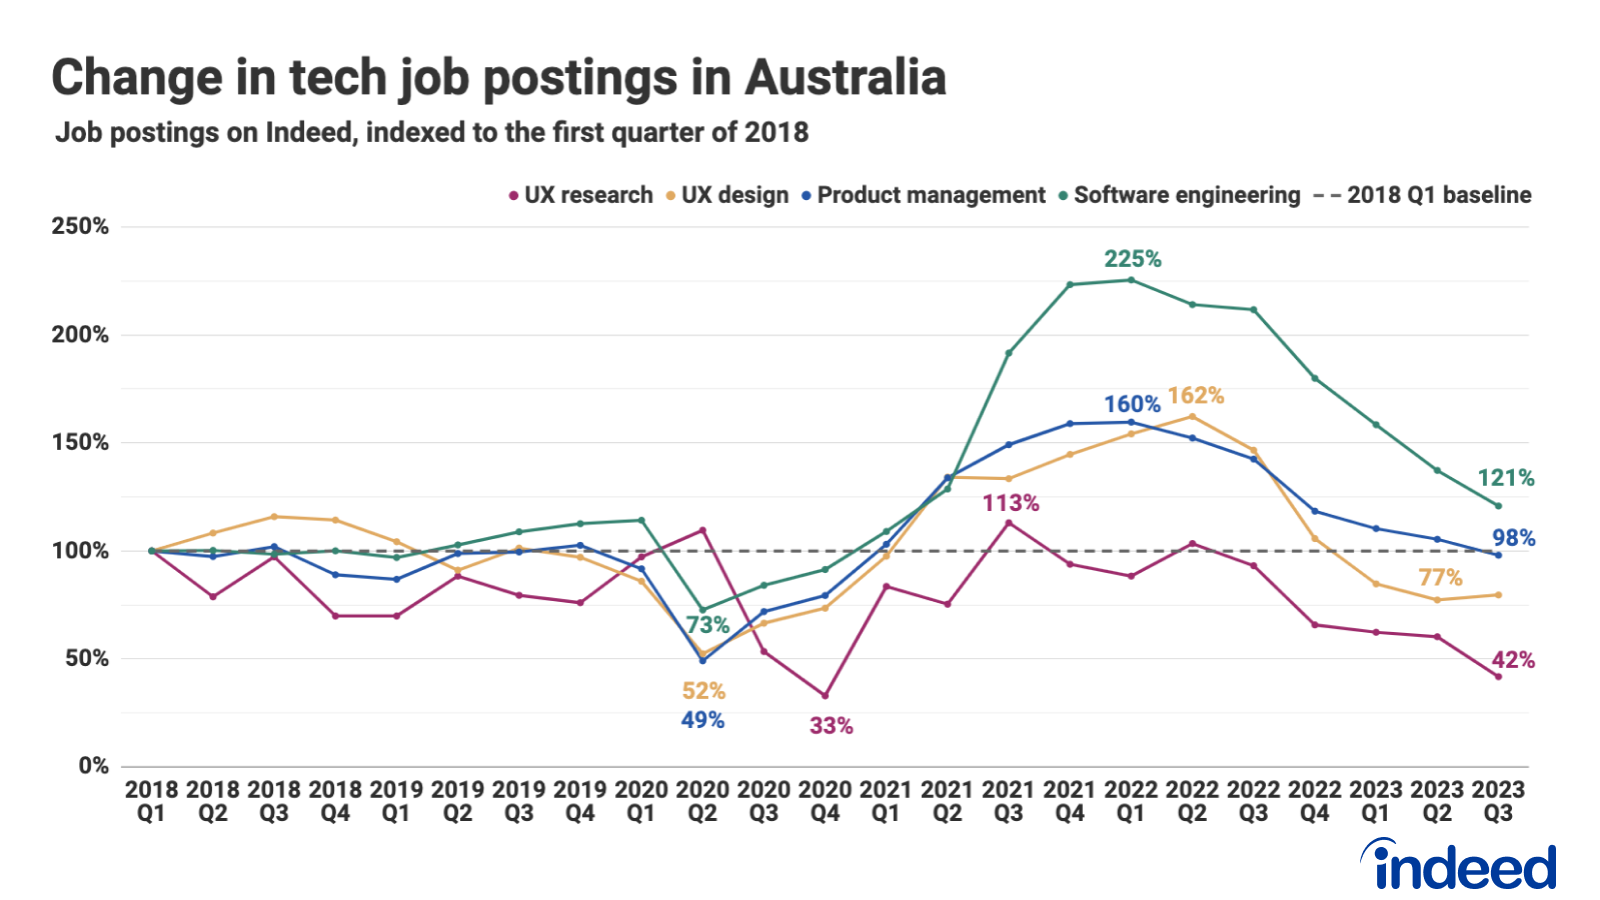 A line graph titled "Change in tech job postings in Australia" showing job post data for four roles indexed to Q1 2018.